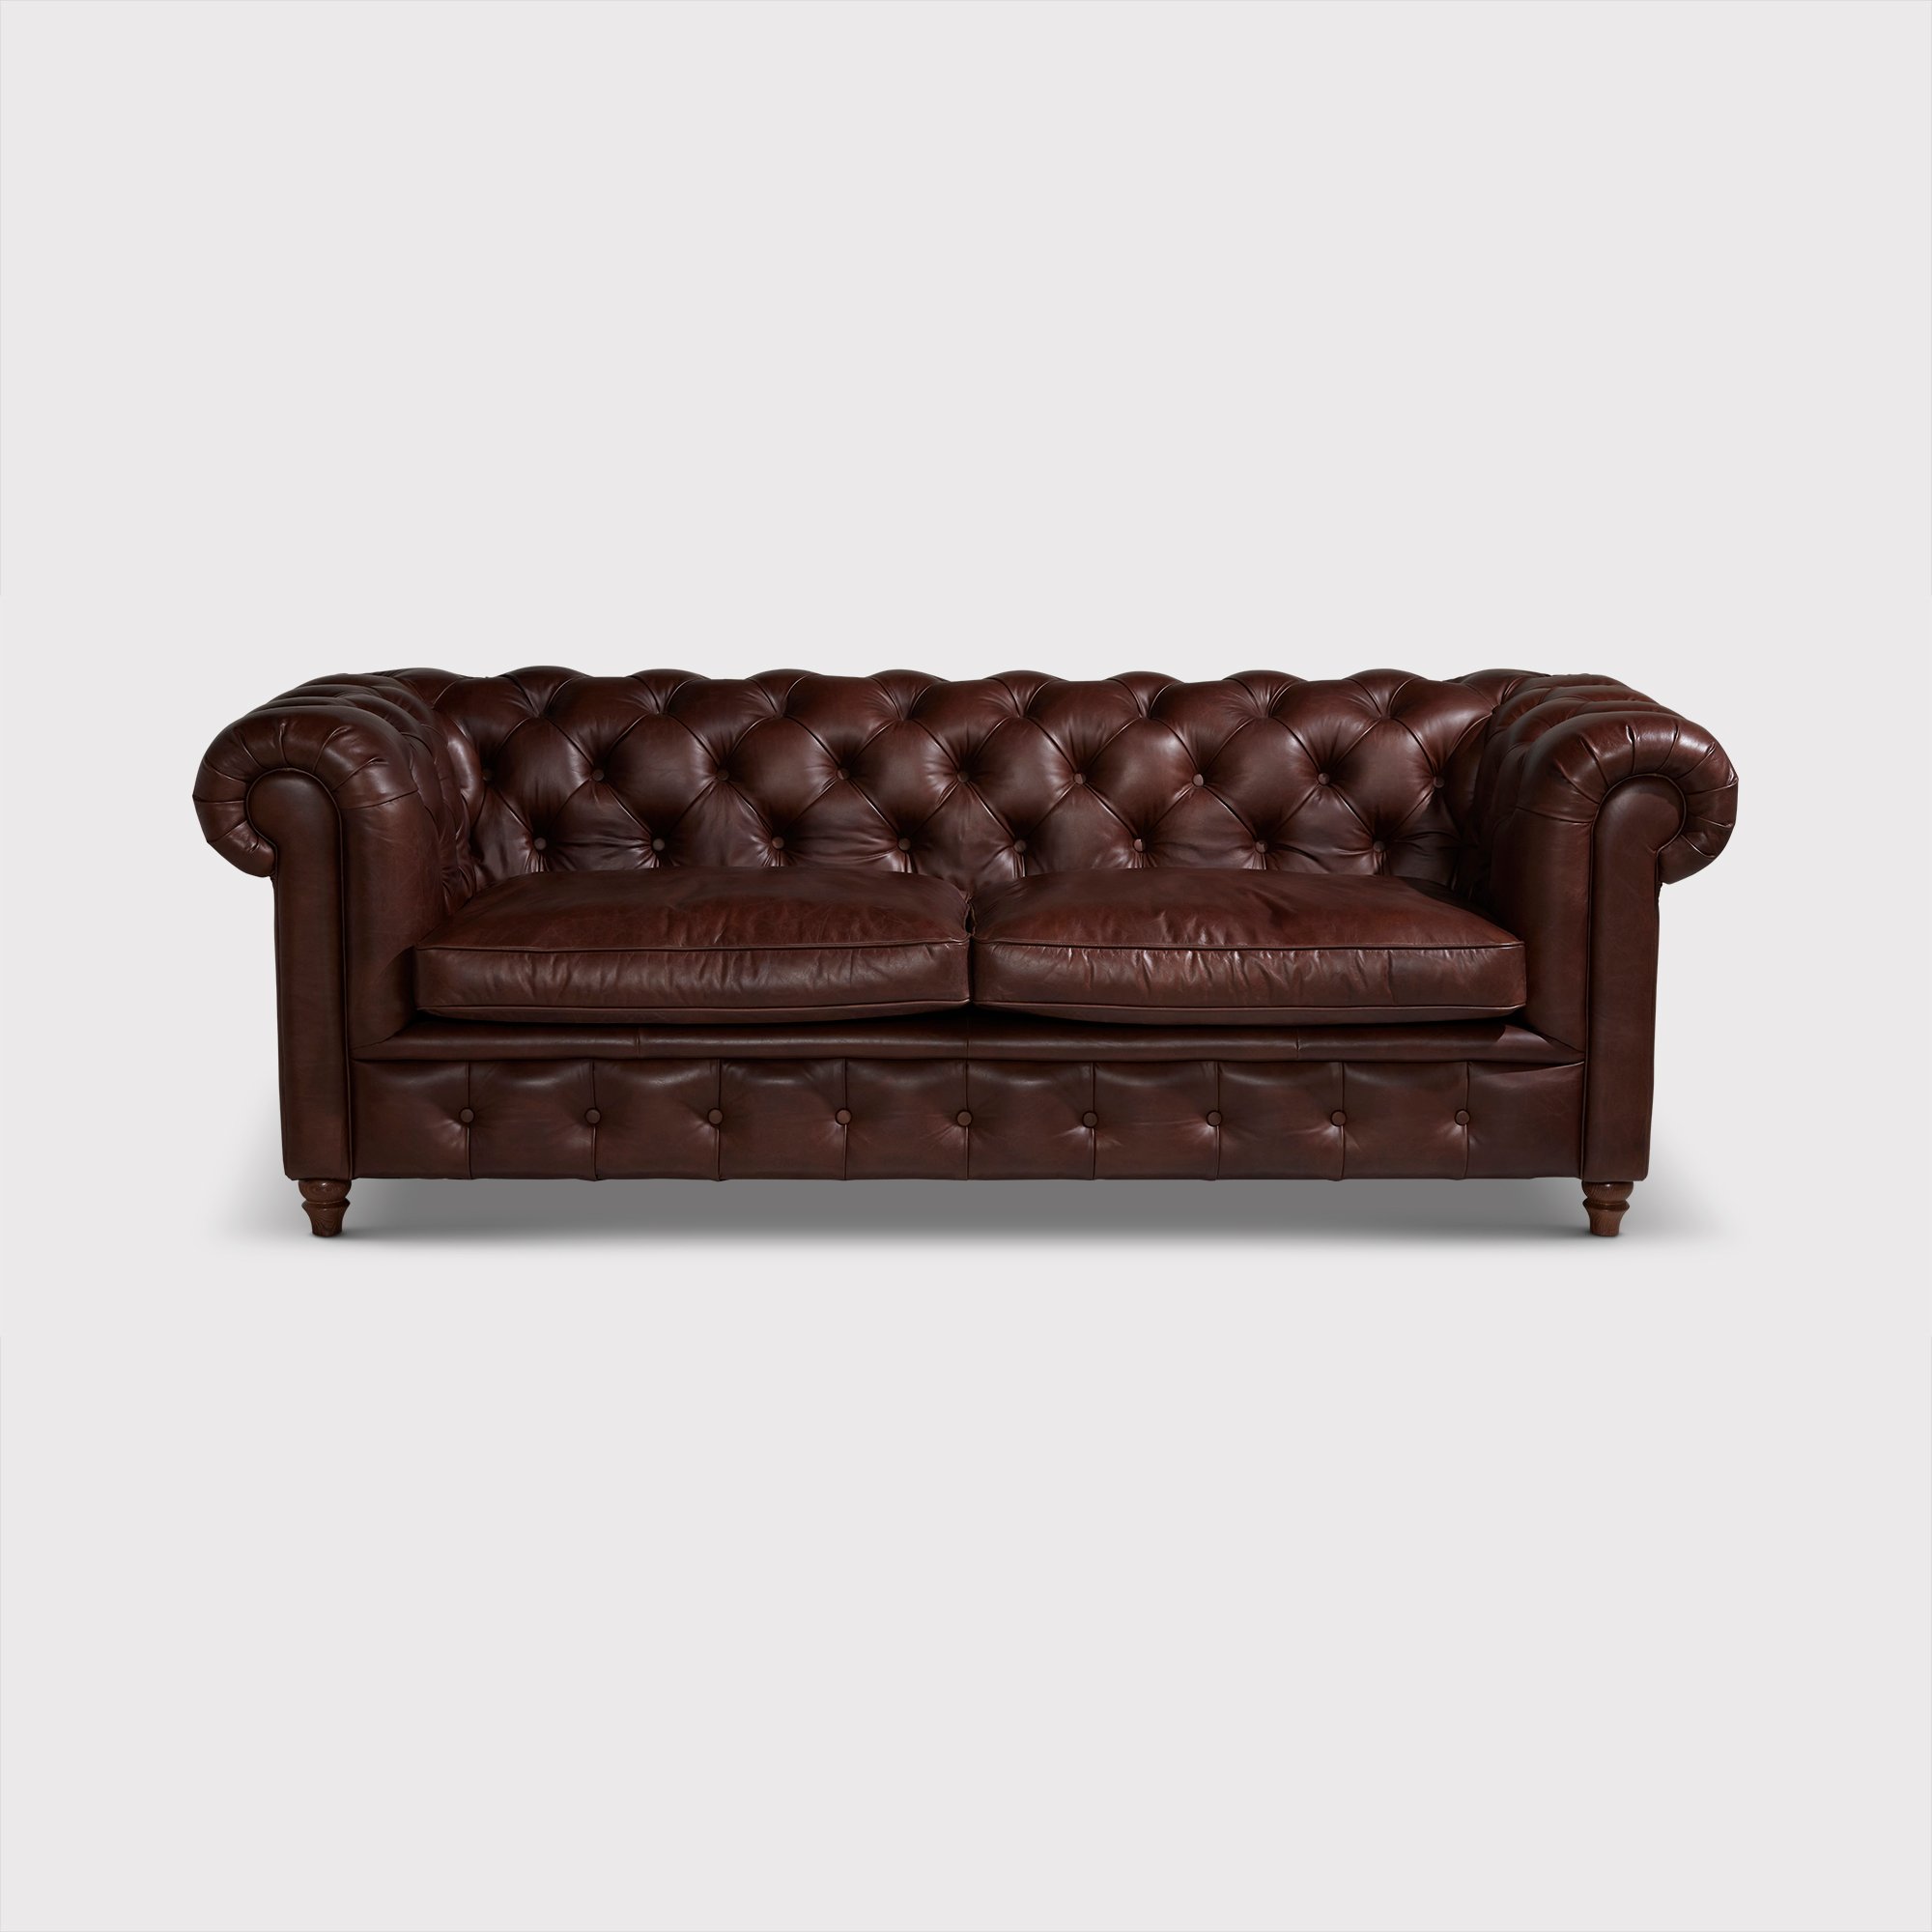 Dalston 3 Seater Sofa, Brown Leather | Barker & Stonehouse